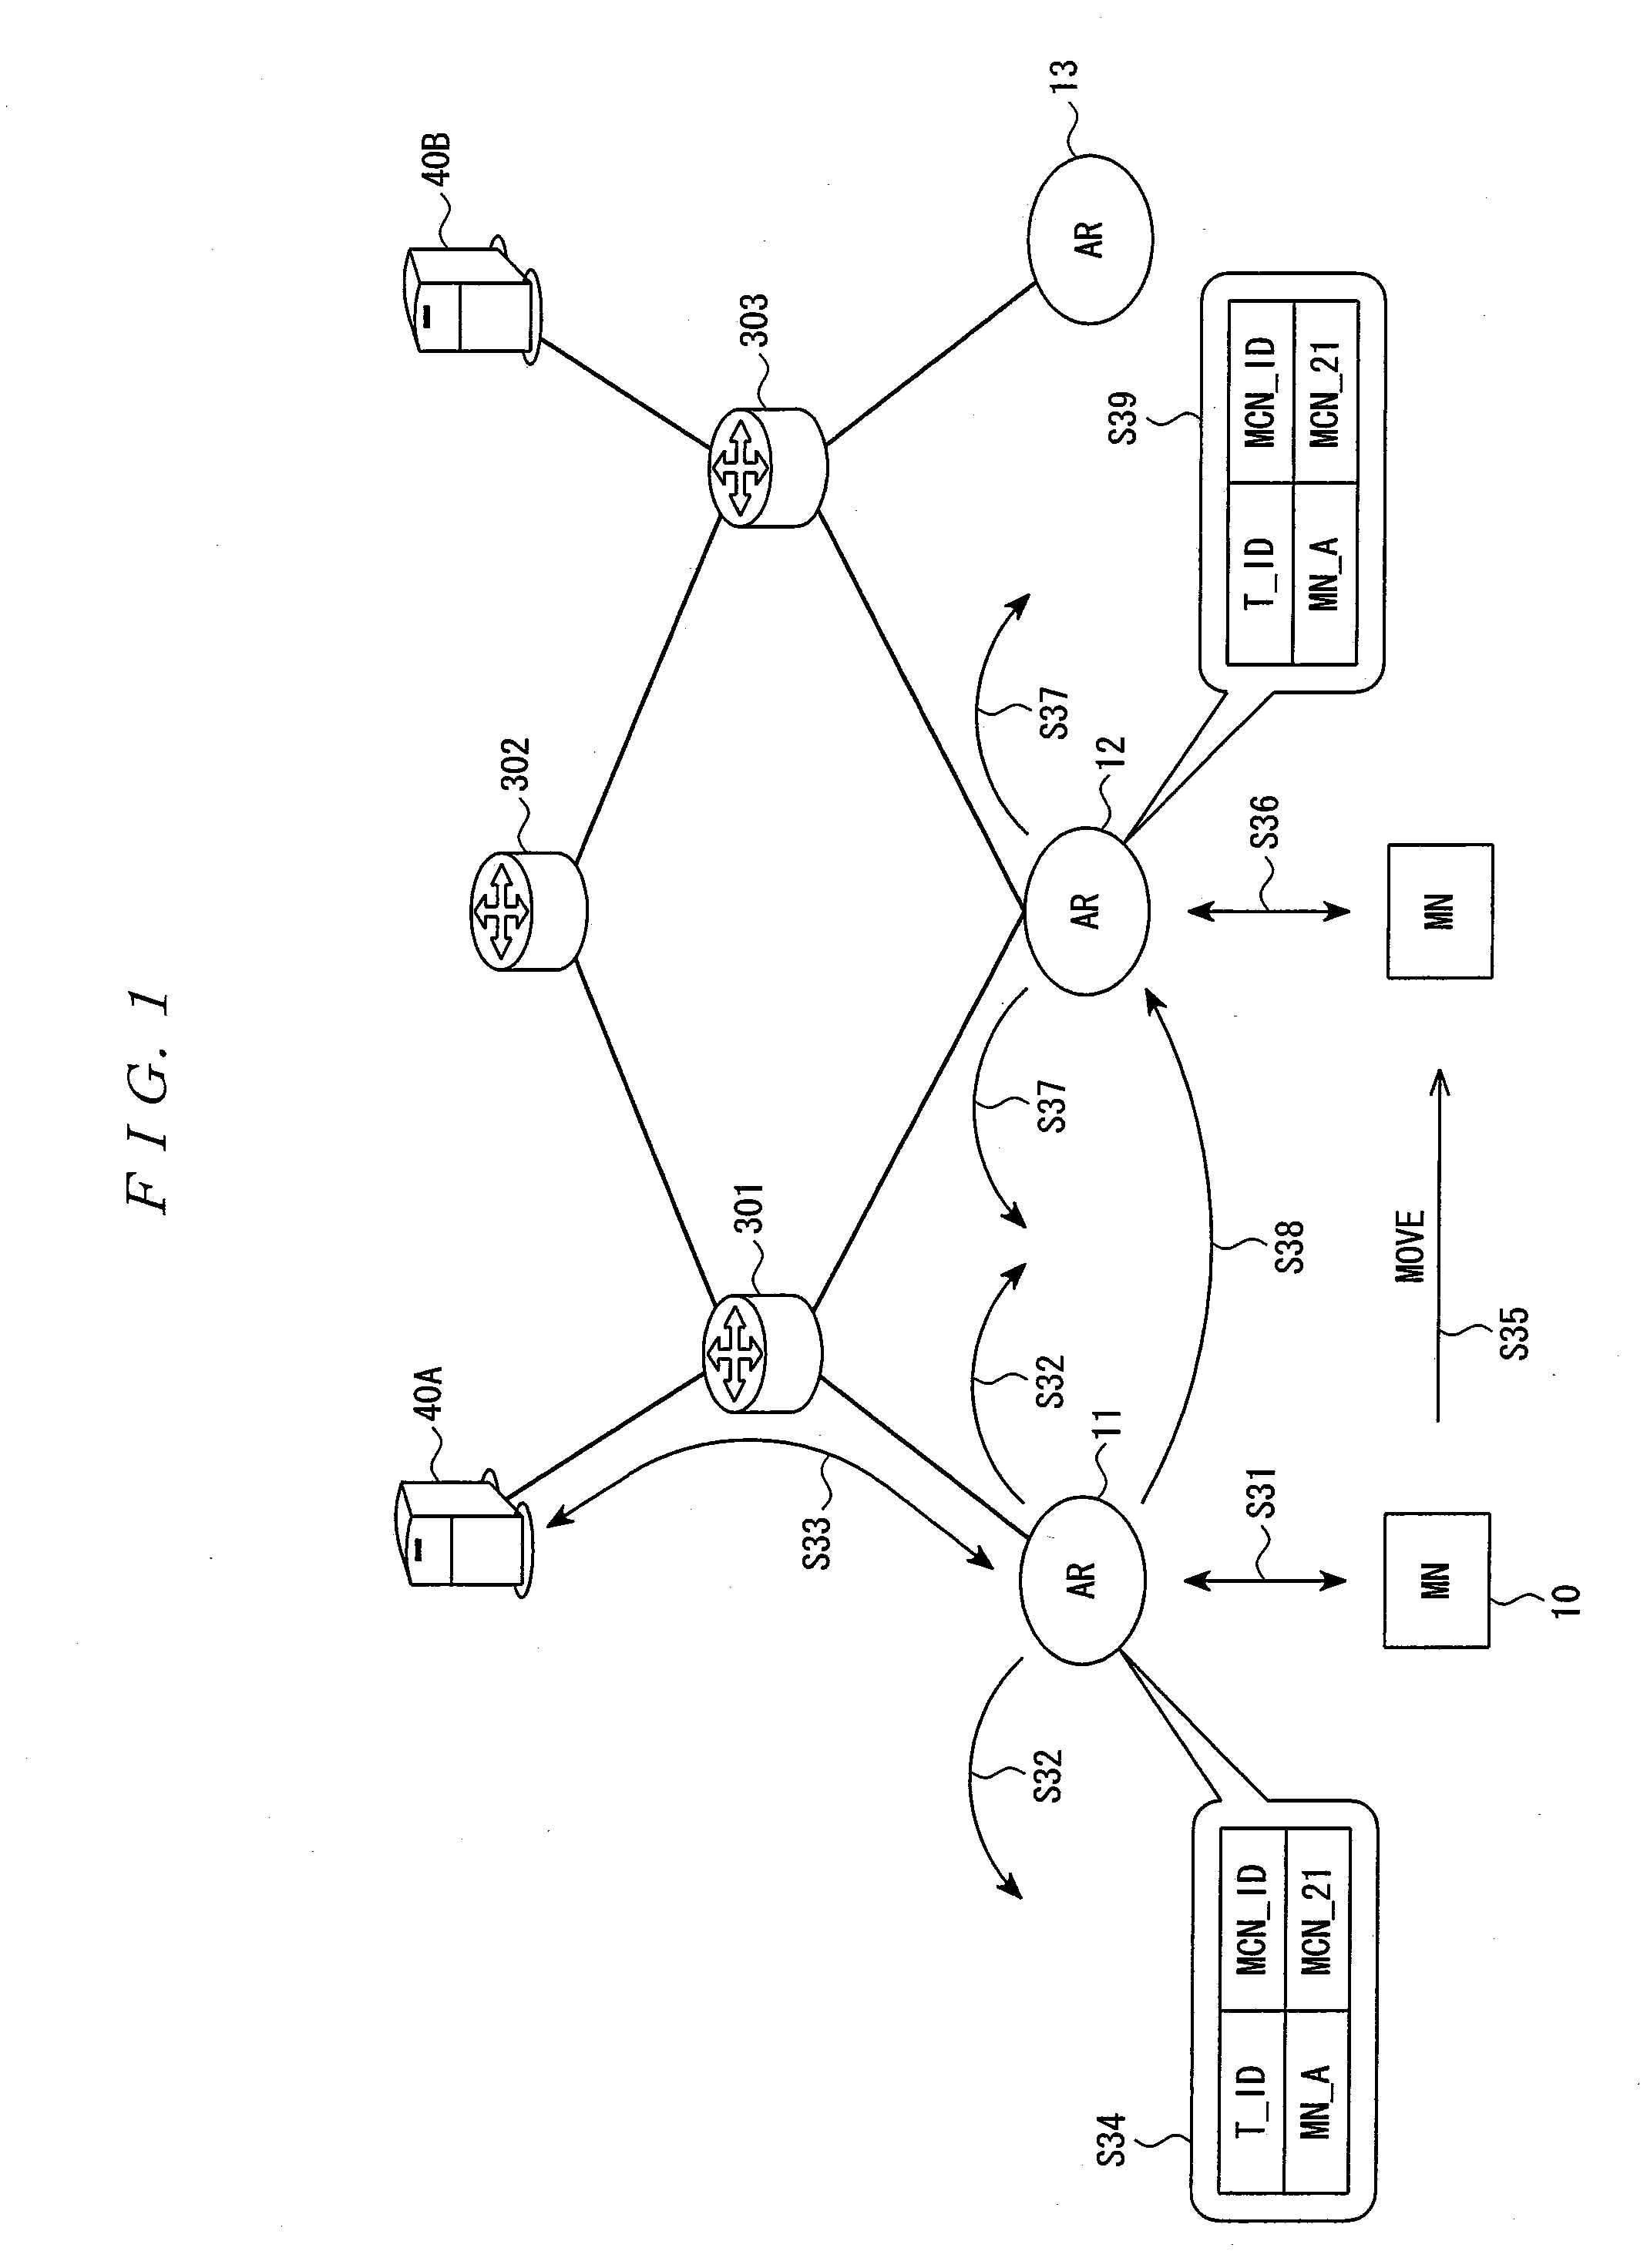 Access Router, Service Control System, and Service Control Method